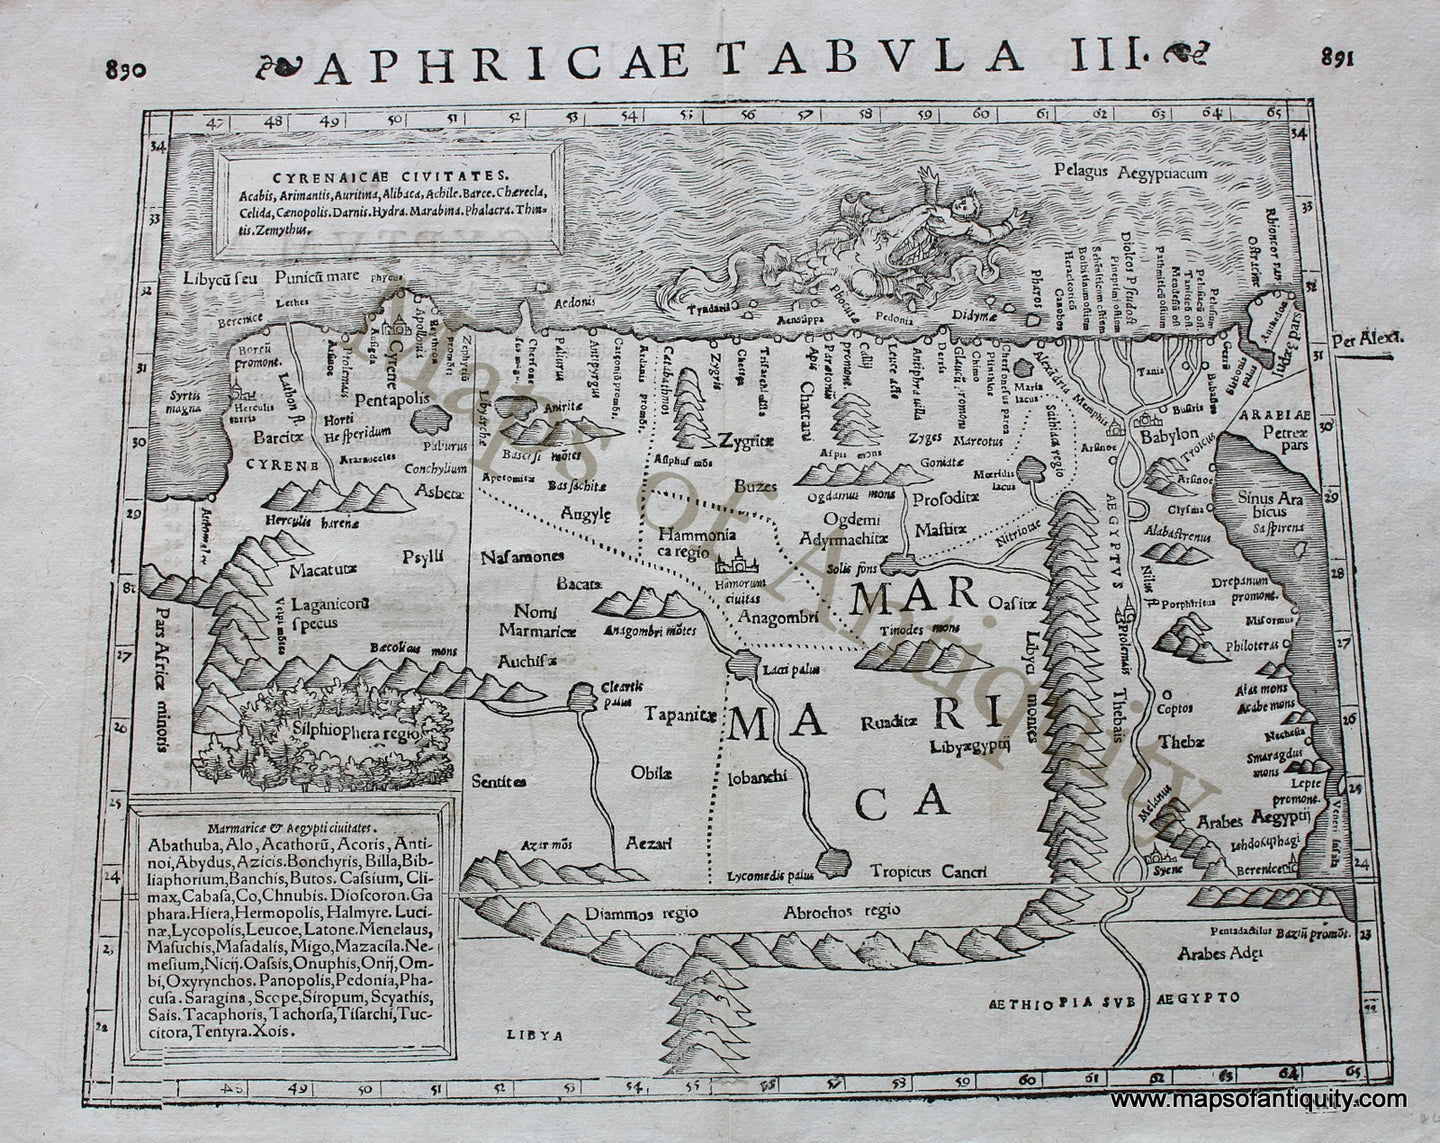 Antique-Black-and-White-Engraved-Map-Aphricae-Tabula-III---890-891-****-North-Africa-Egypt-1542-Munster-Maps-Of-Antiquity